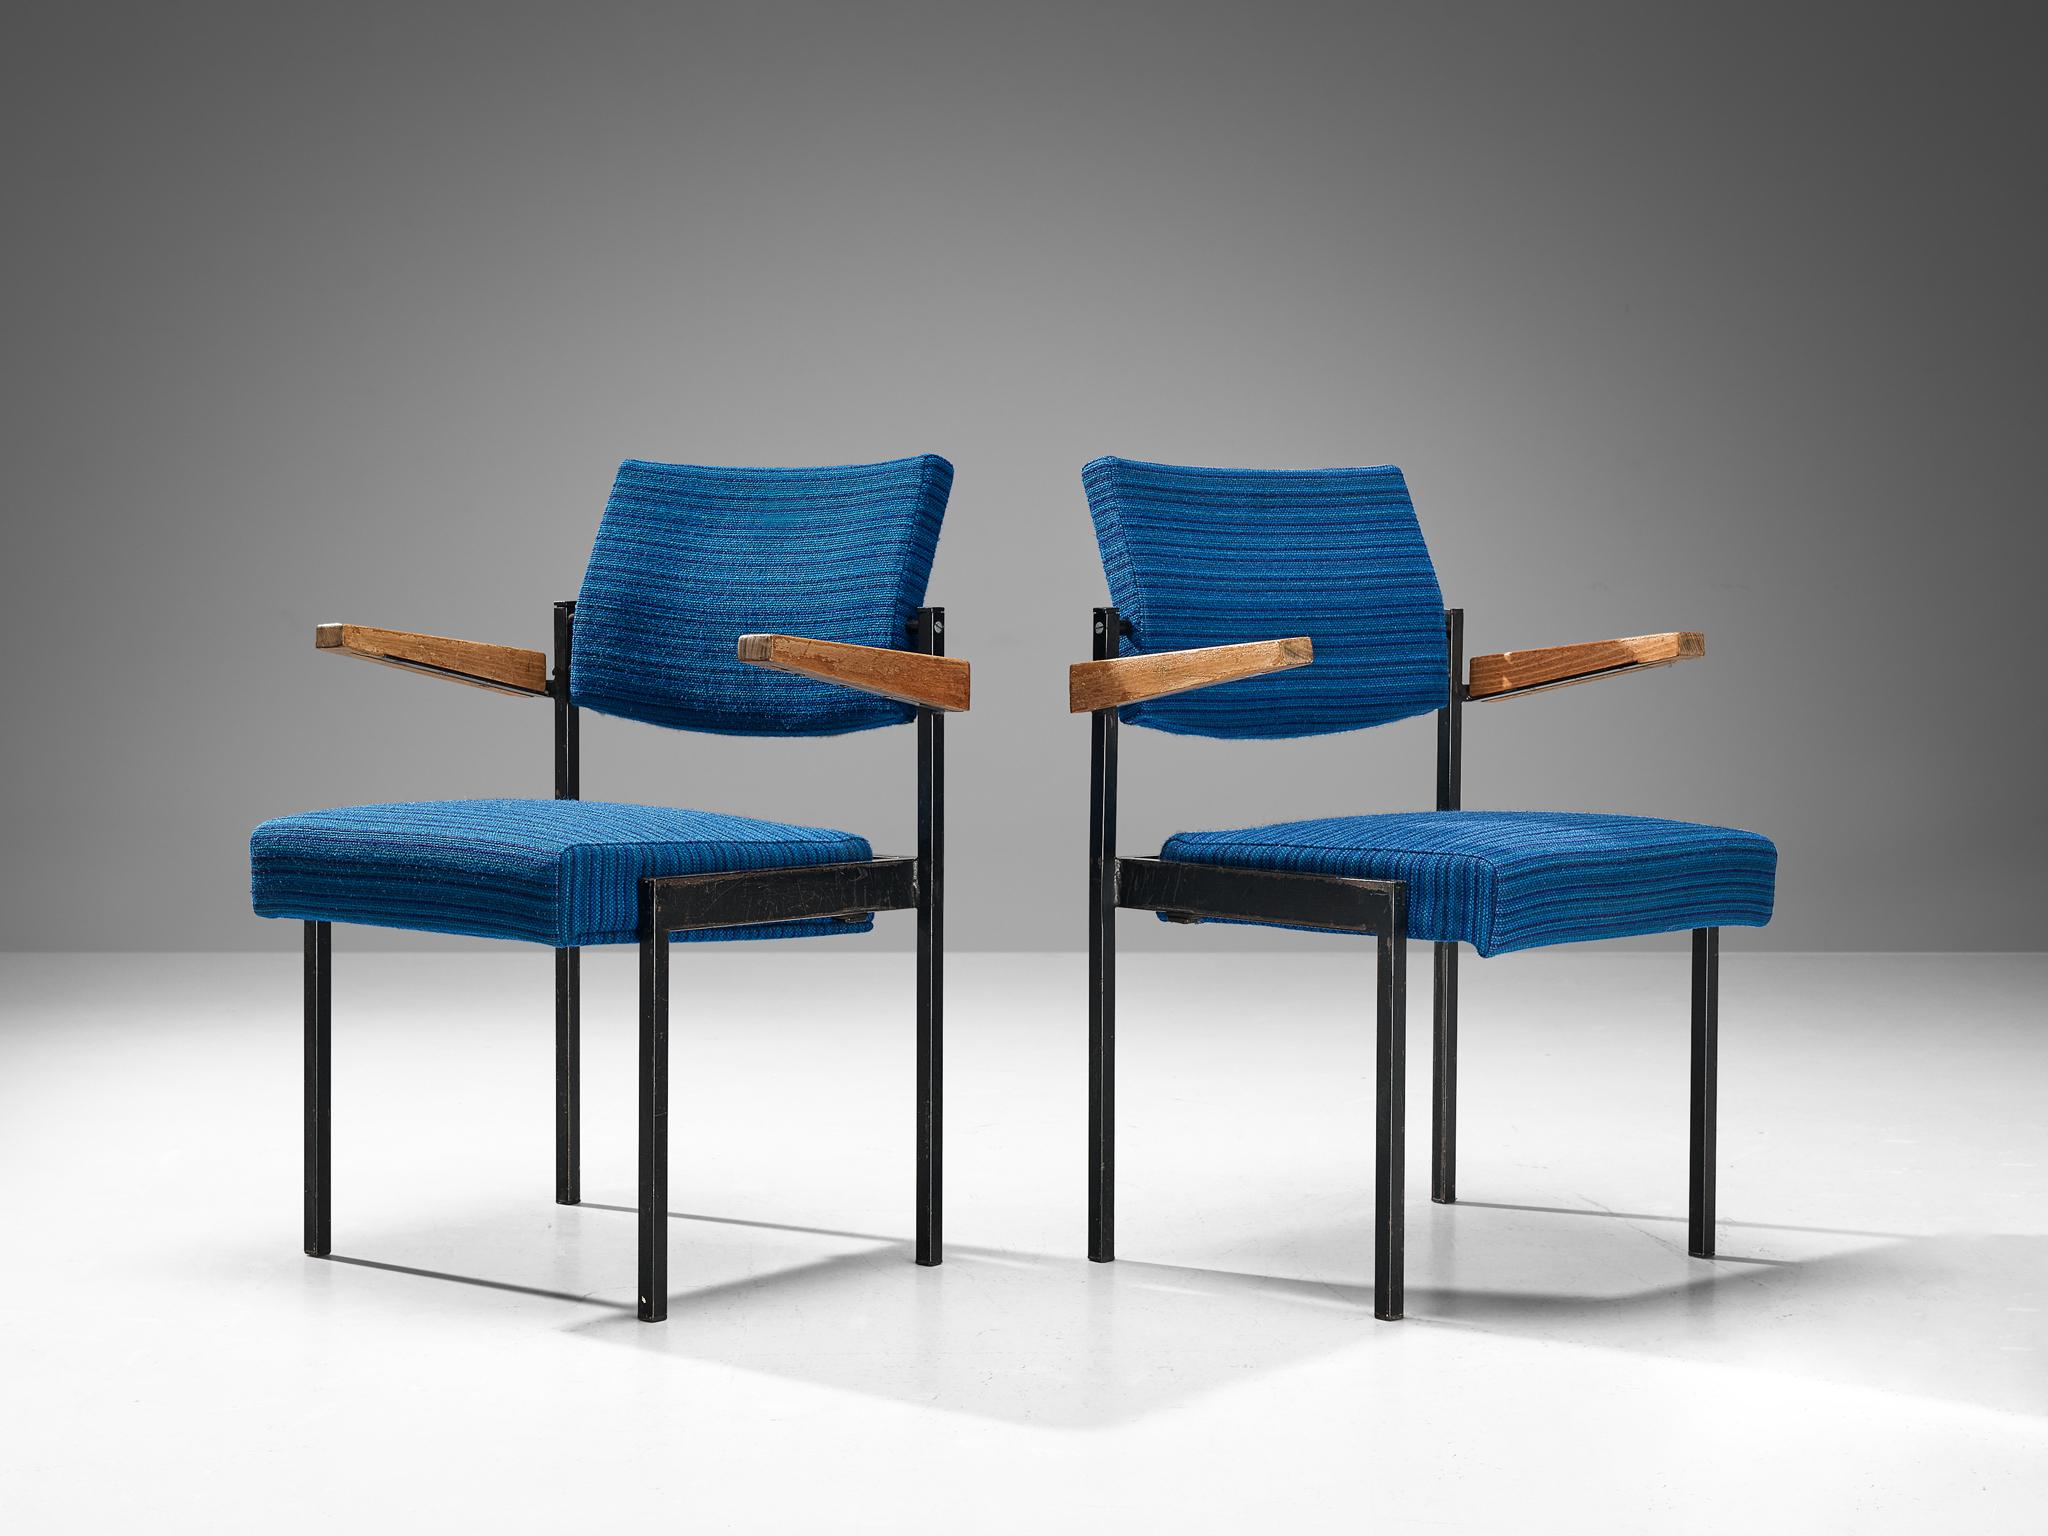 Pair of armchairs, lacquered metal, fabric, beech, The Netherlands, 1960s.

This set of mid-century Dutch chairs are stackable and therefore easy to store. Another functional feature is the possibility to fold the seats. The upholstery is structured